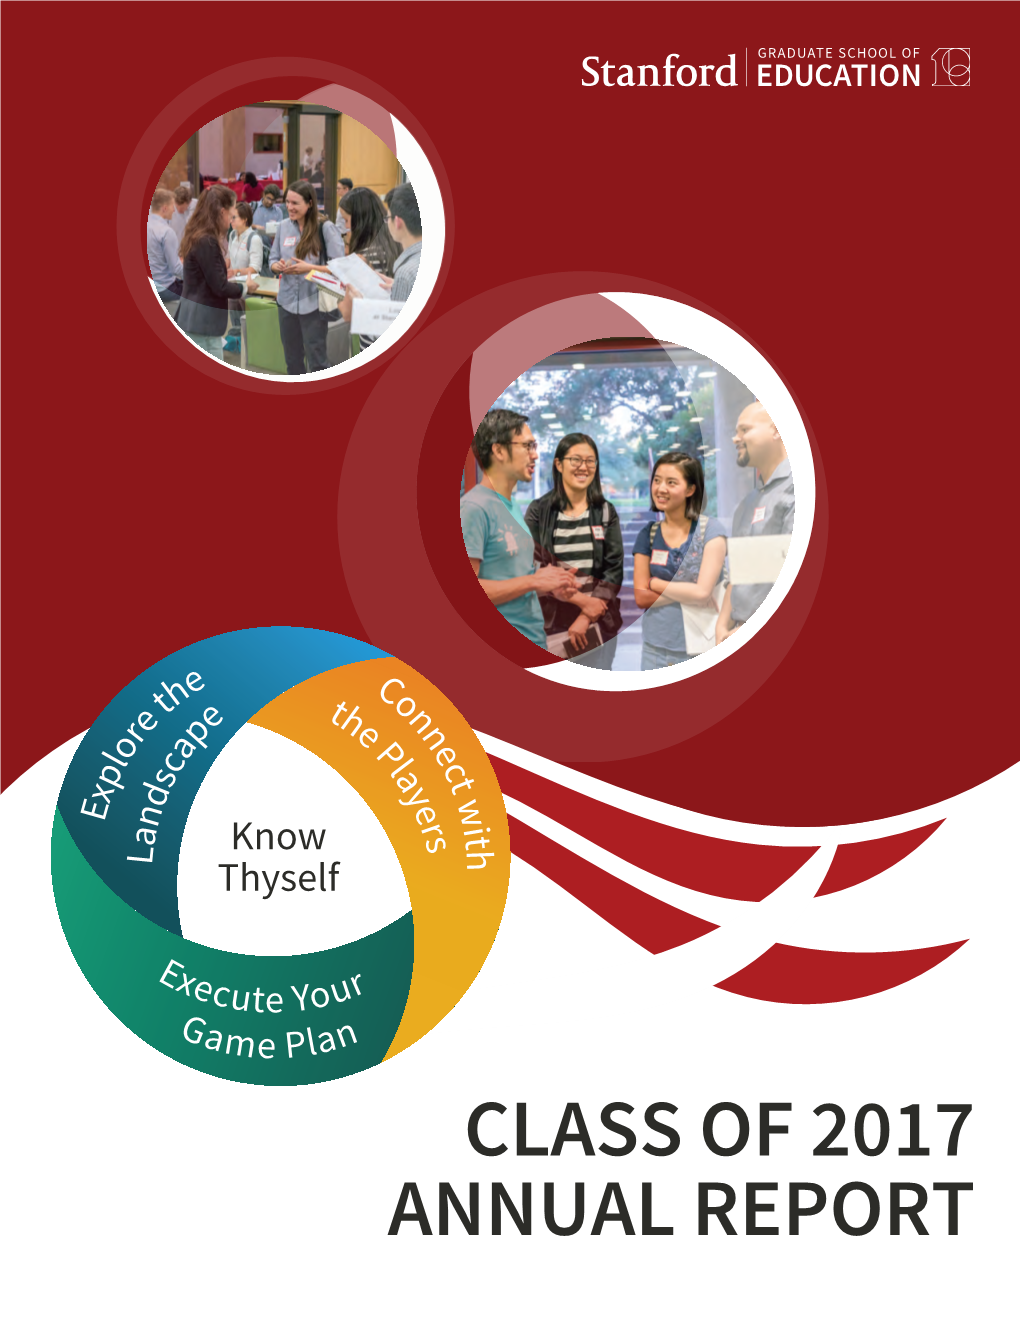 Class of 2017 Annual Report